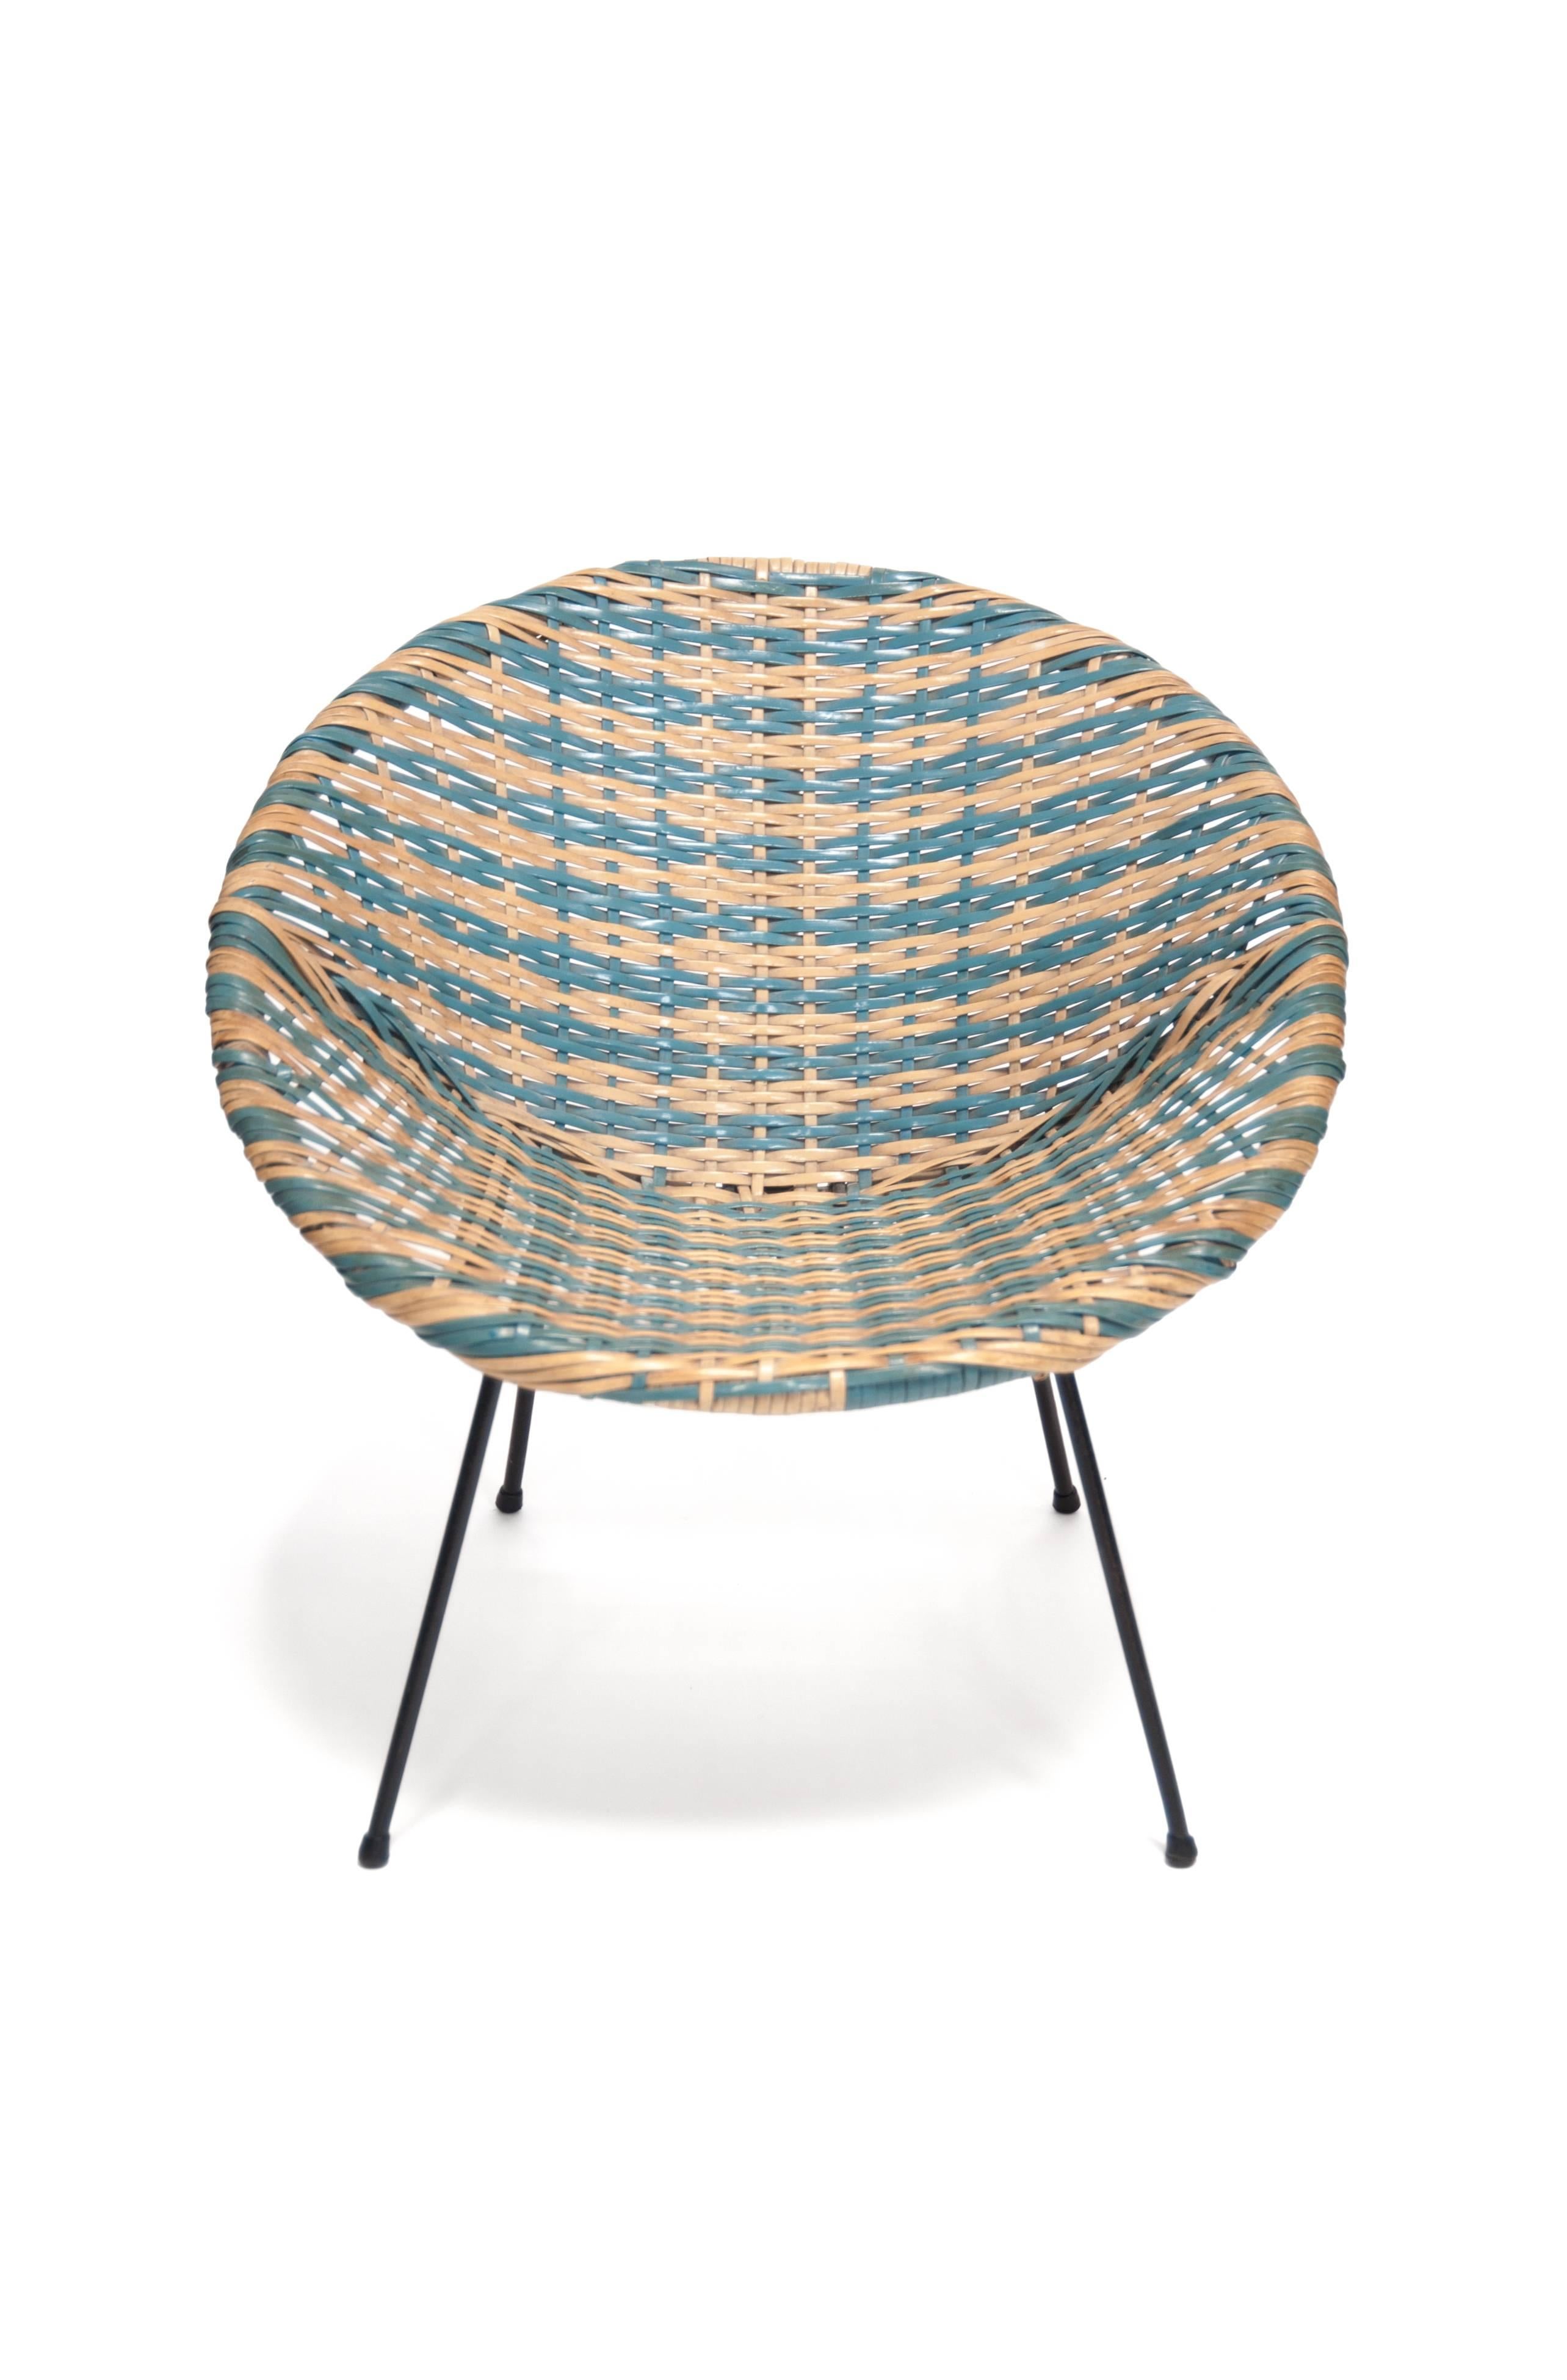 Round woven child chair, designer unknown, USA, 1960s

Round woven child chair
Designer unknown, USA, 1960s
Woven plastic, iron
Measures: H 18 in, W 19 in, D 19 in (seat H 10.25 in).